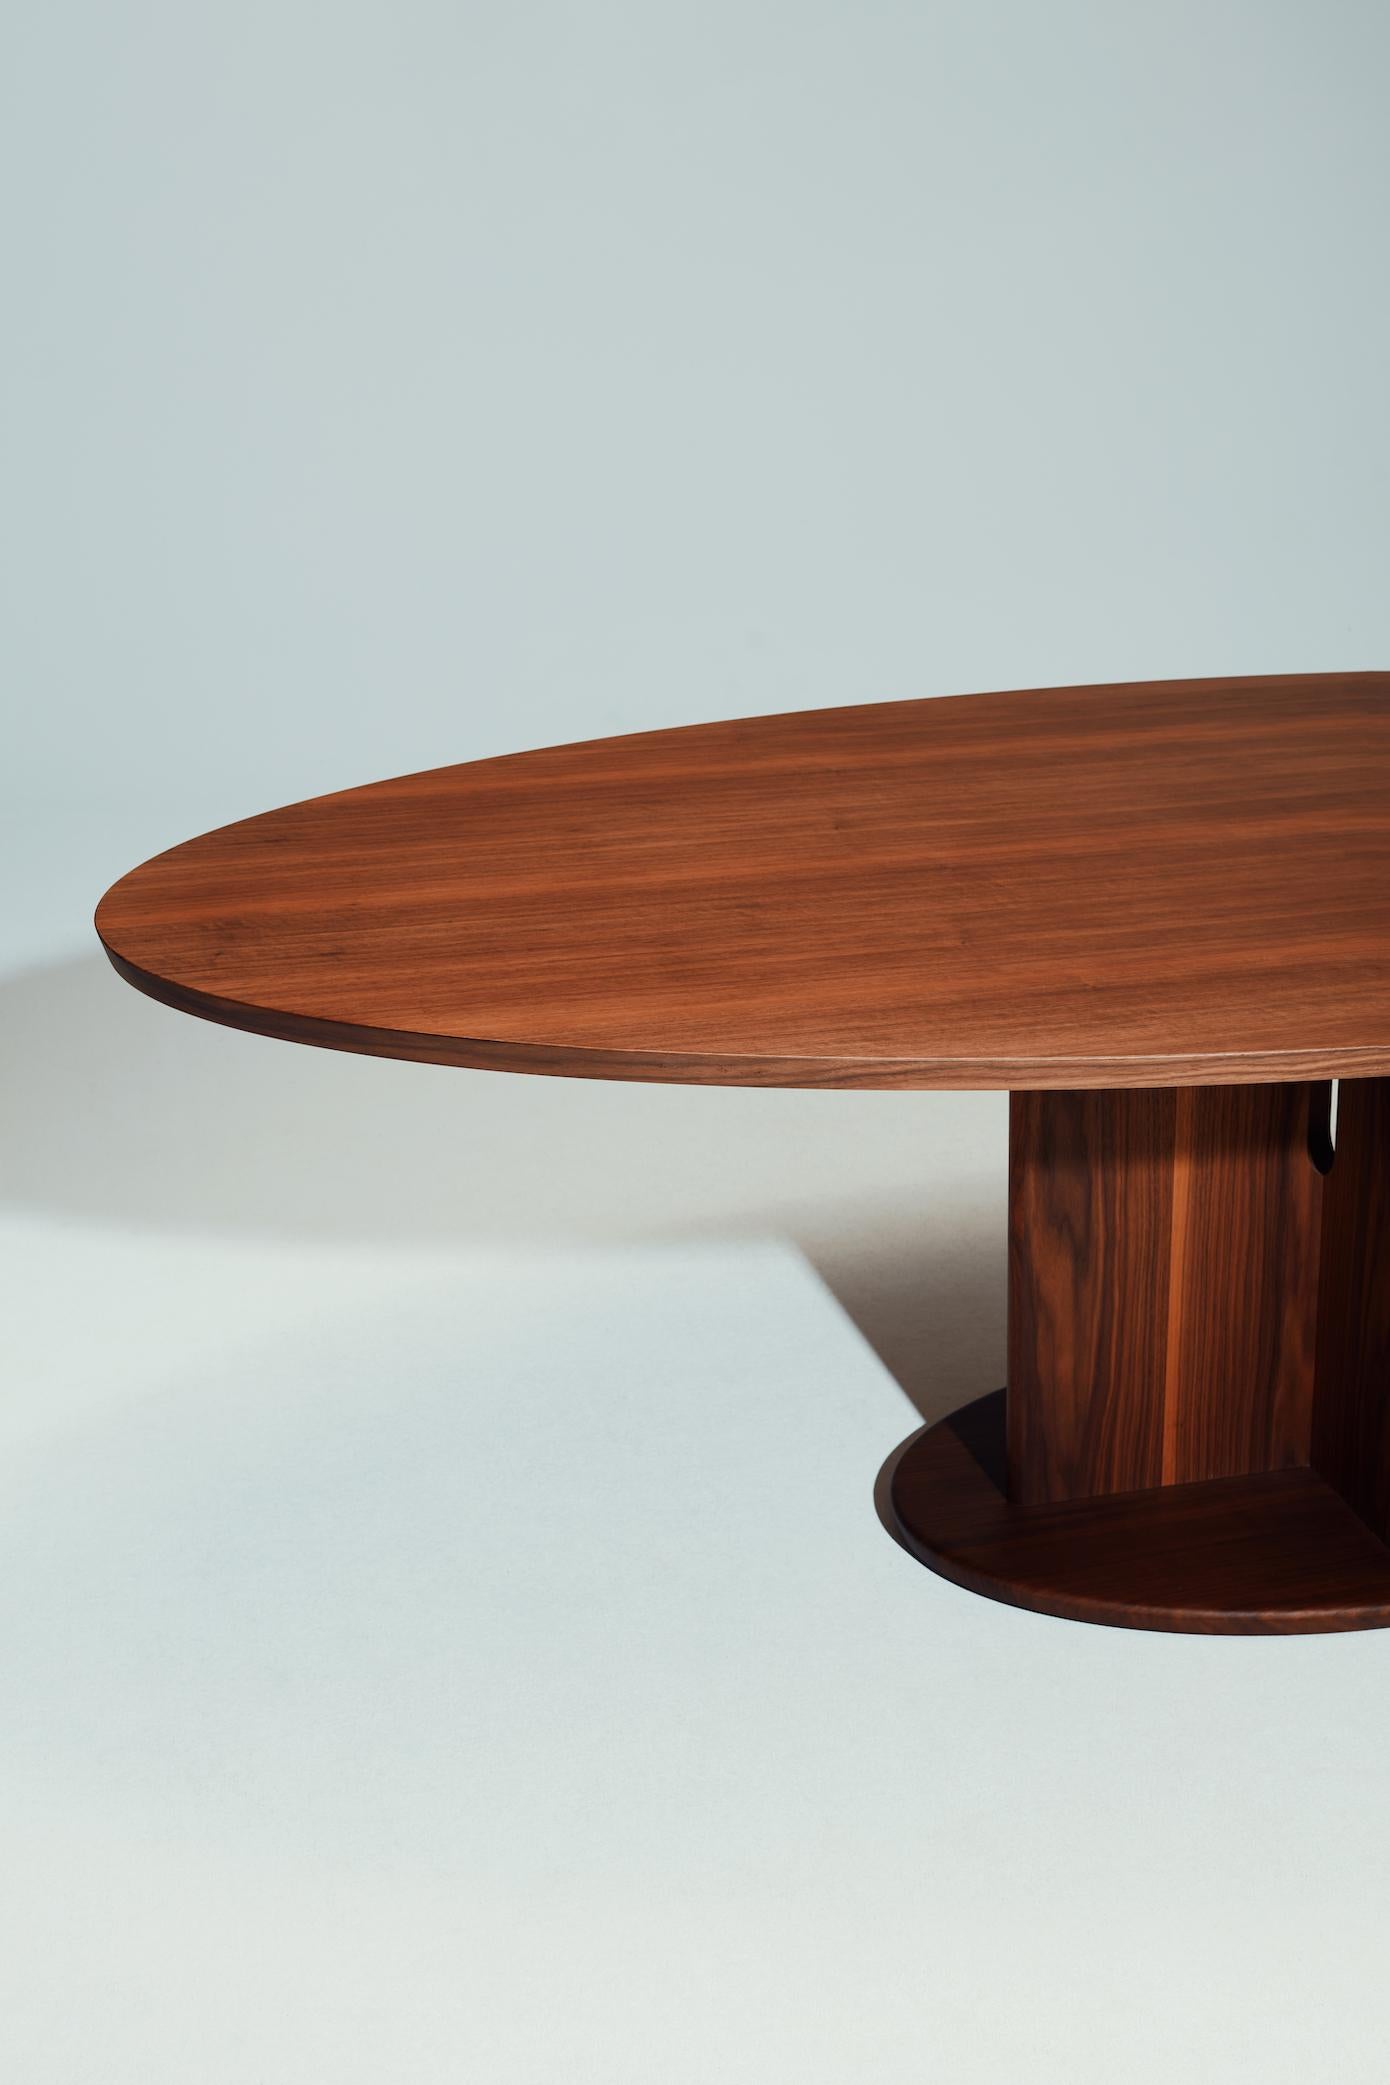 Italian La Manufacture-Paris Intersection Canaletto Walnut Oval Table by Neri & Hu For Sale